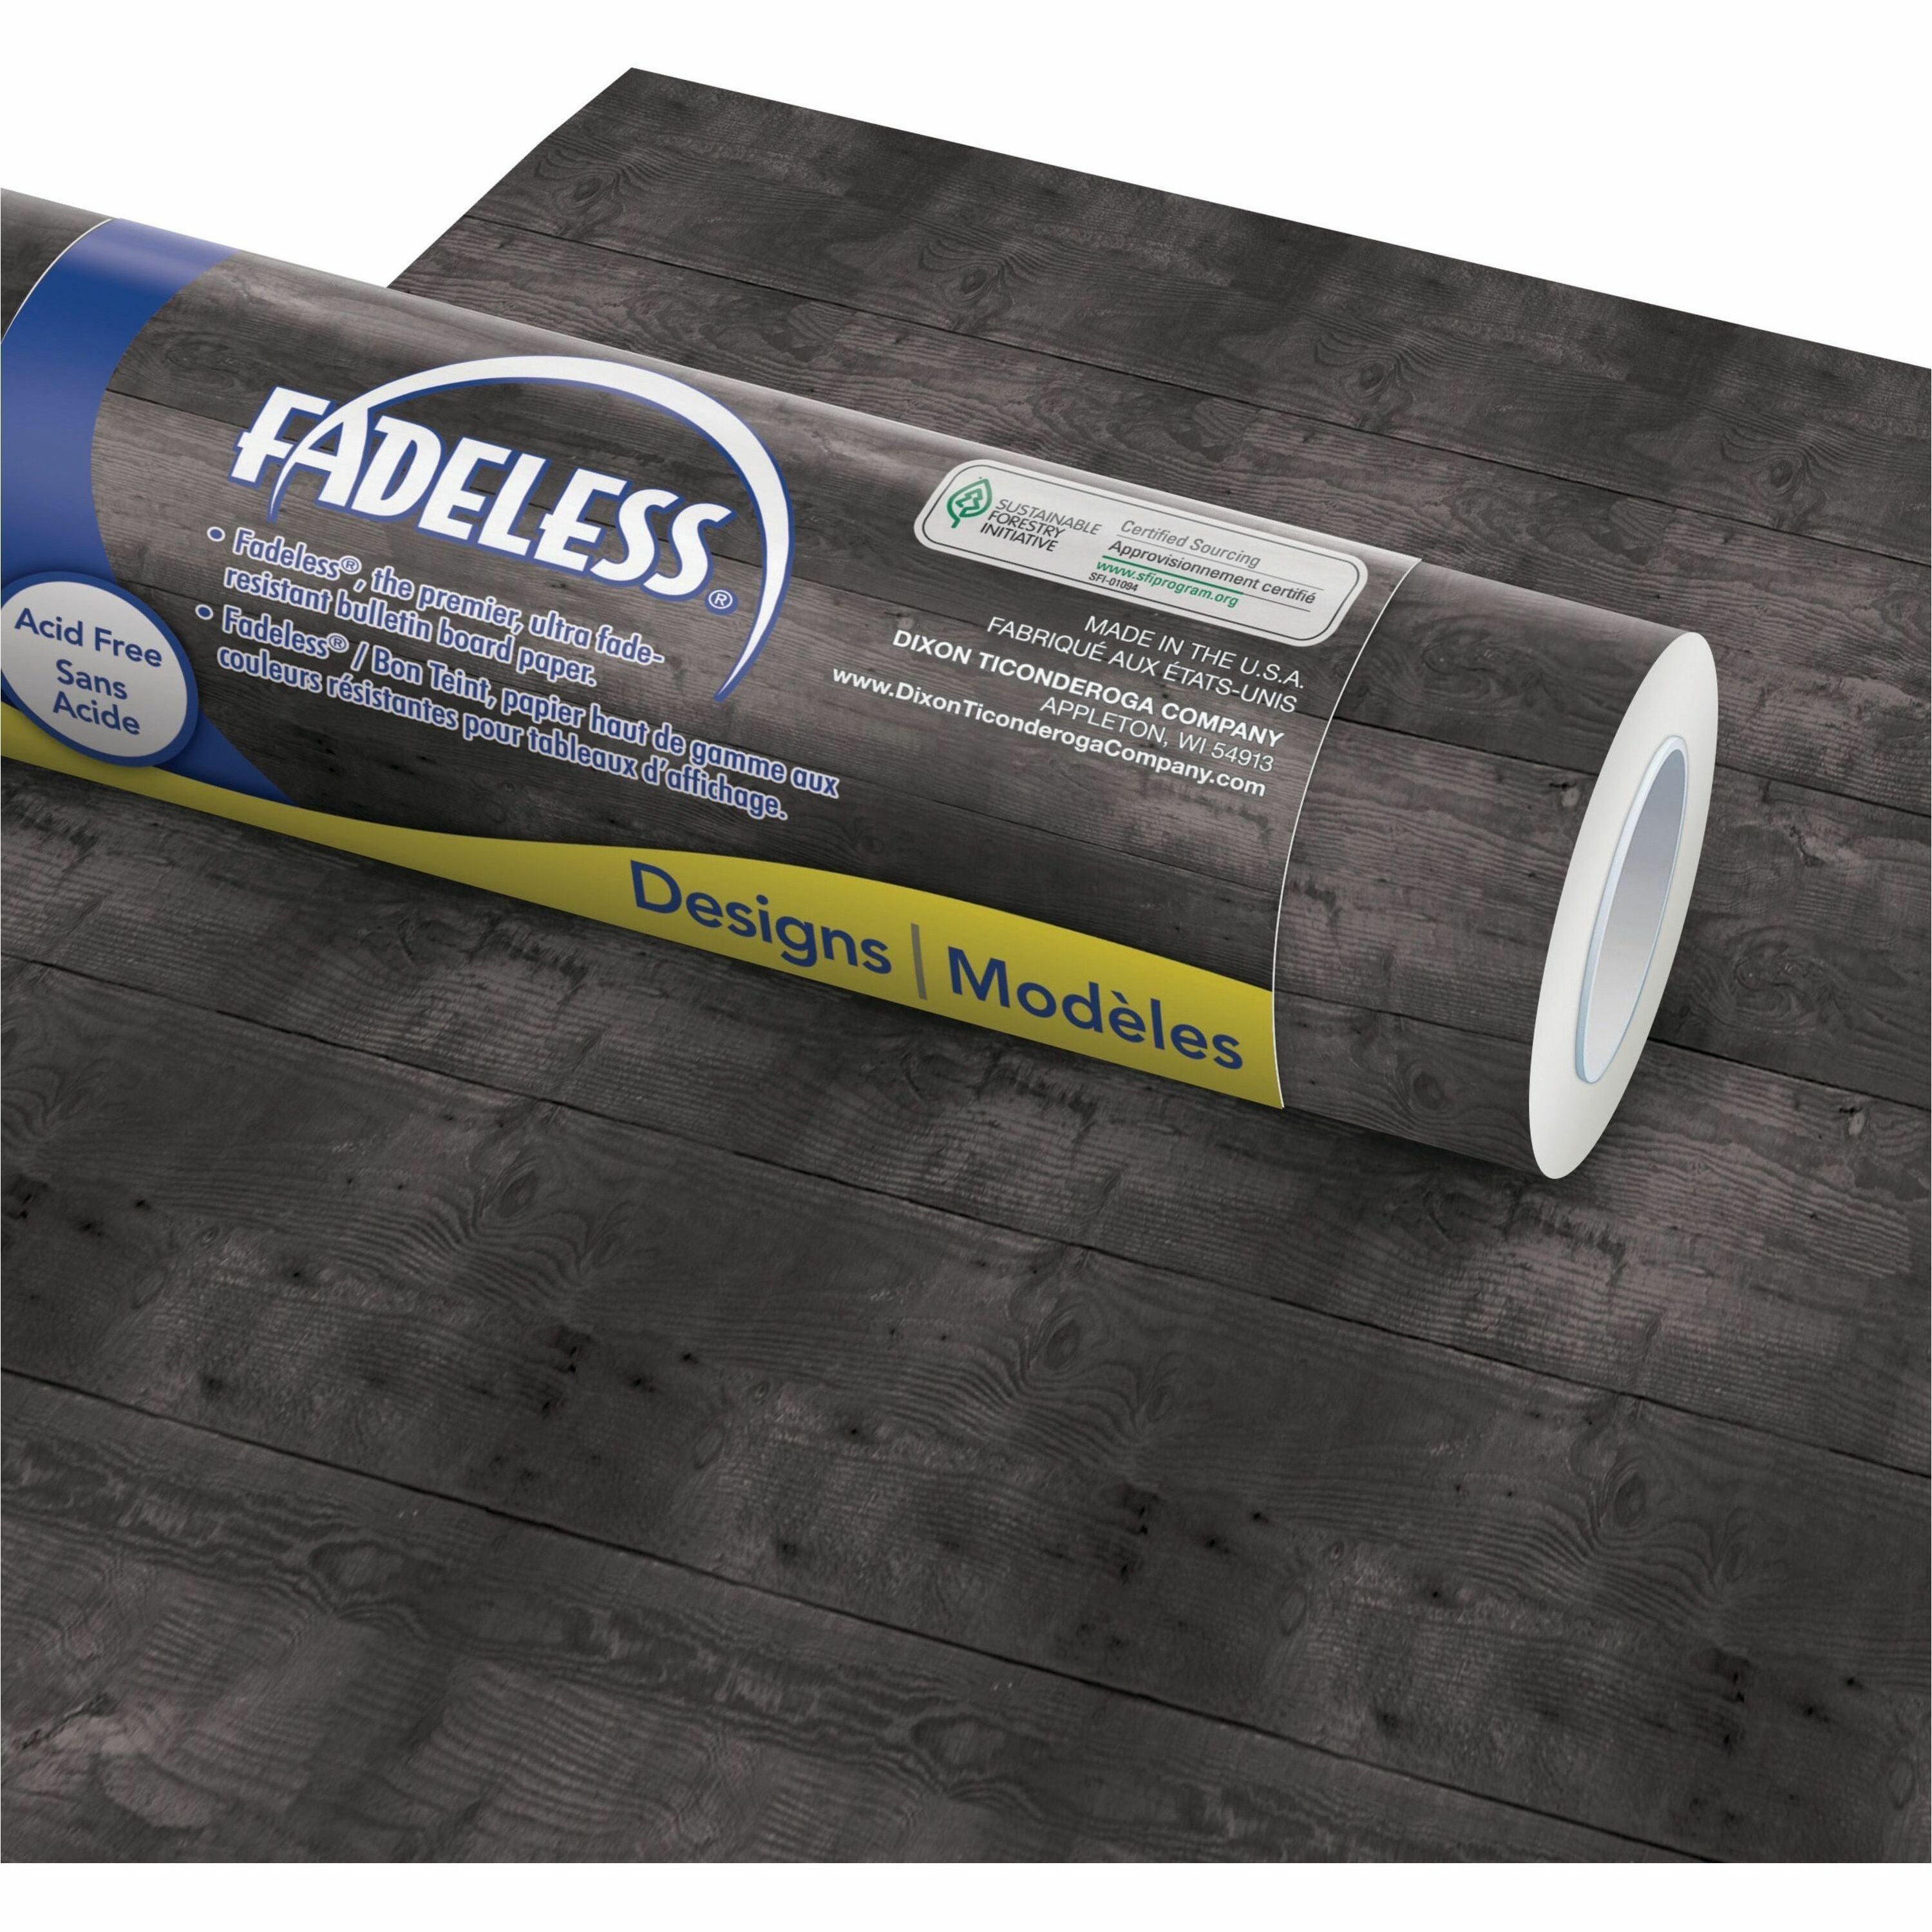 fadeless-designs-paper-roll-art-project-craft-project-classroom-display-table-skirting-decoration-bulletin-board-48width-x-50length-1-roll-black_pacp56915 - 1